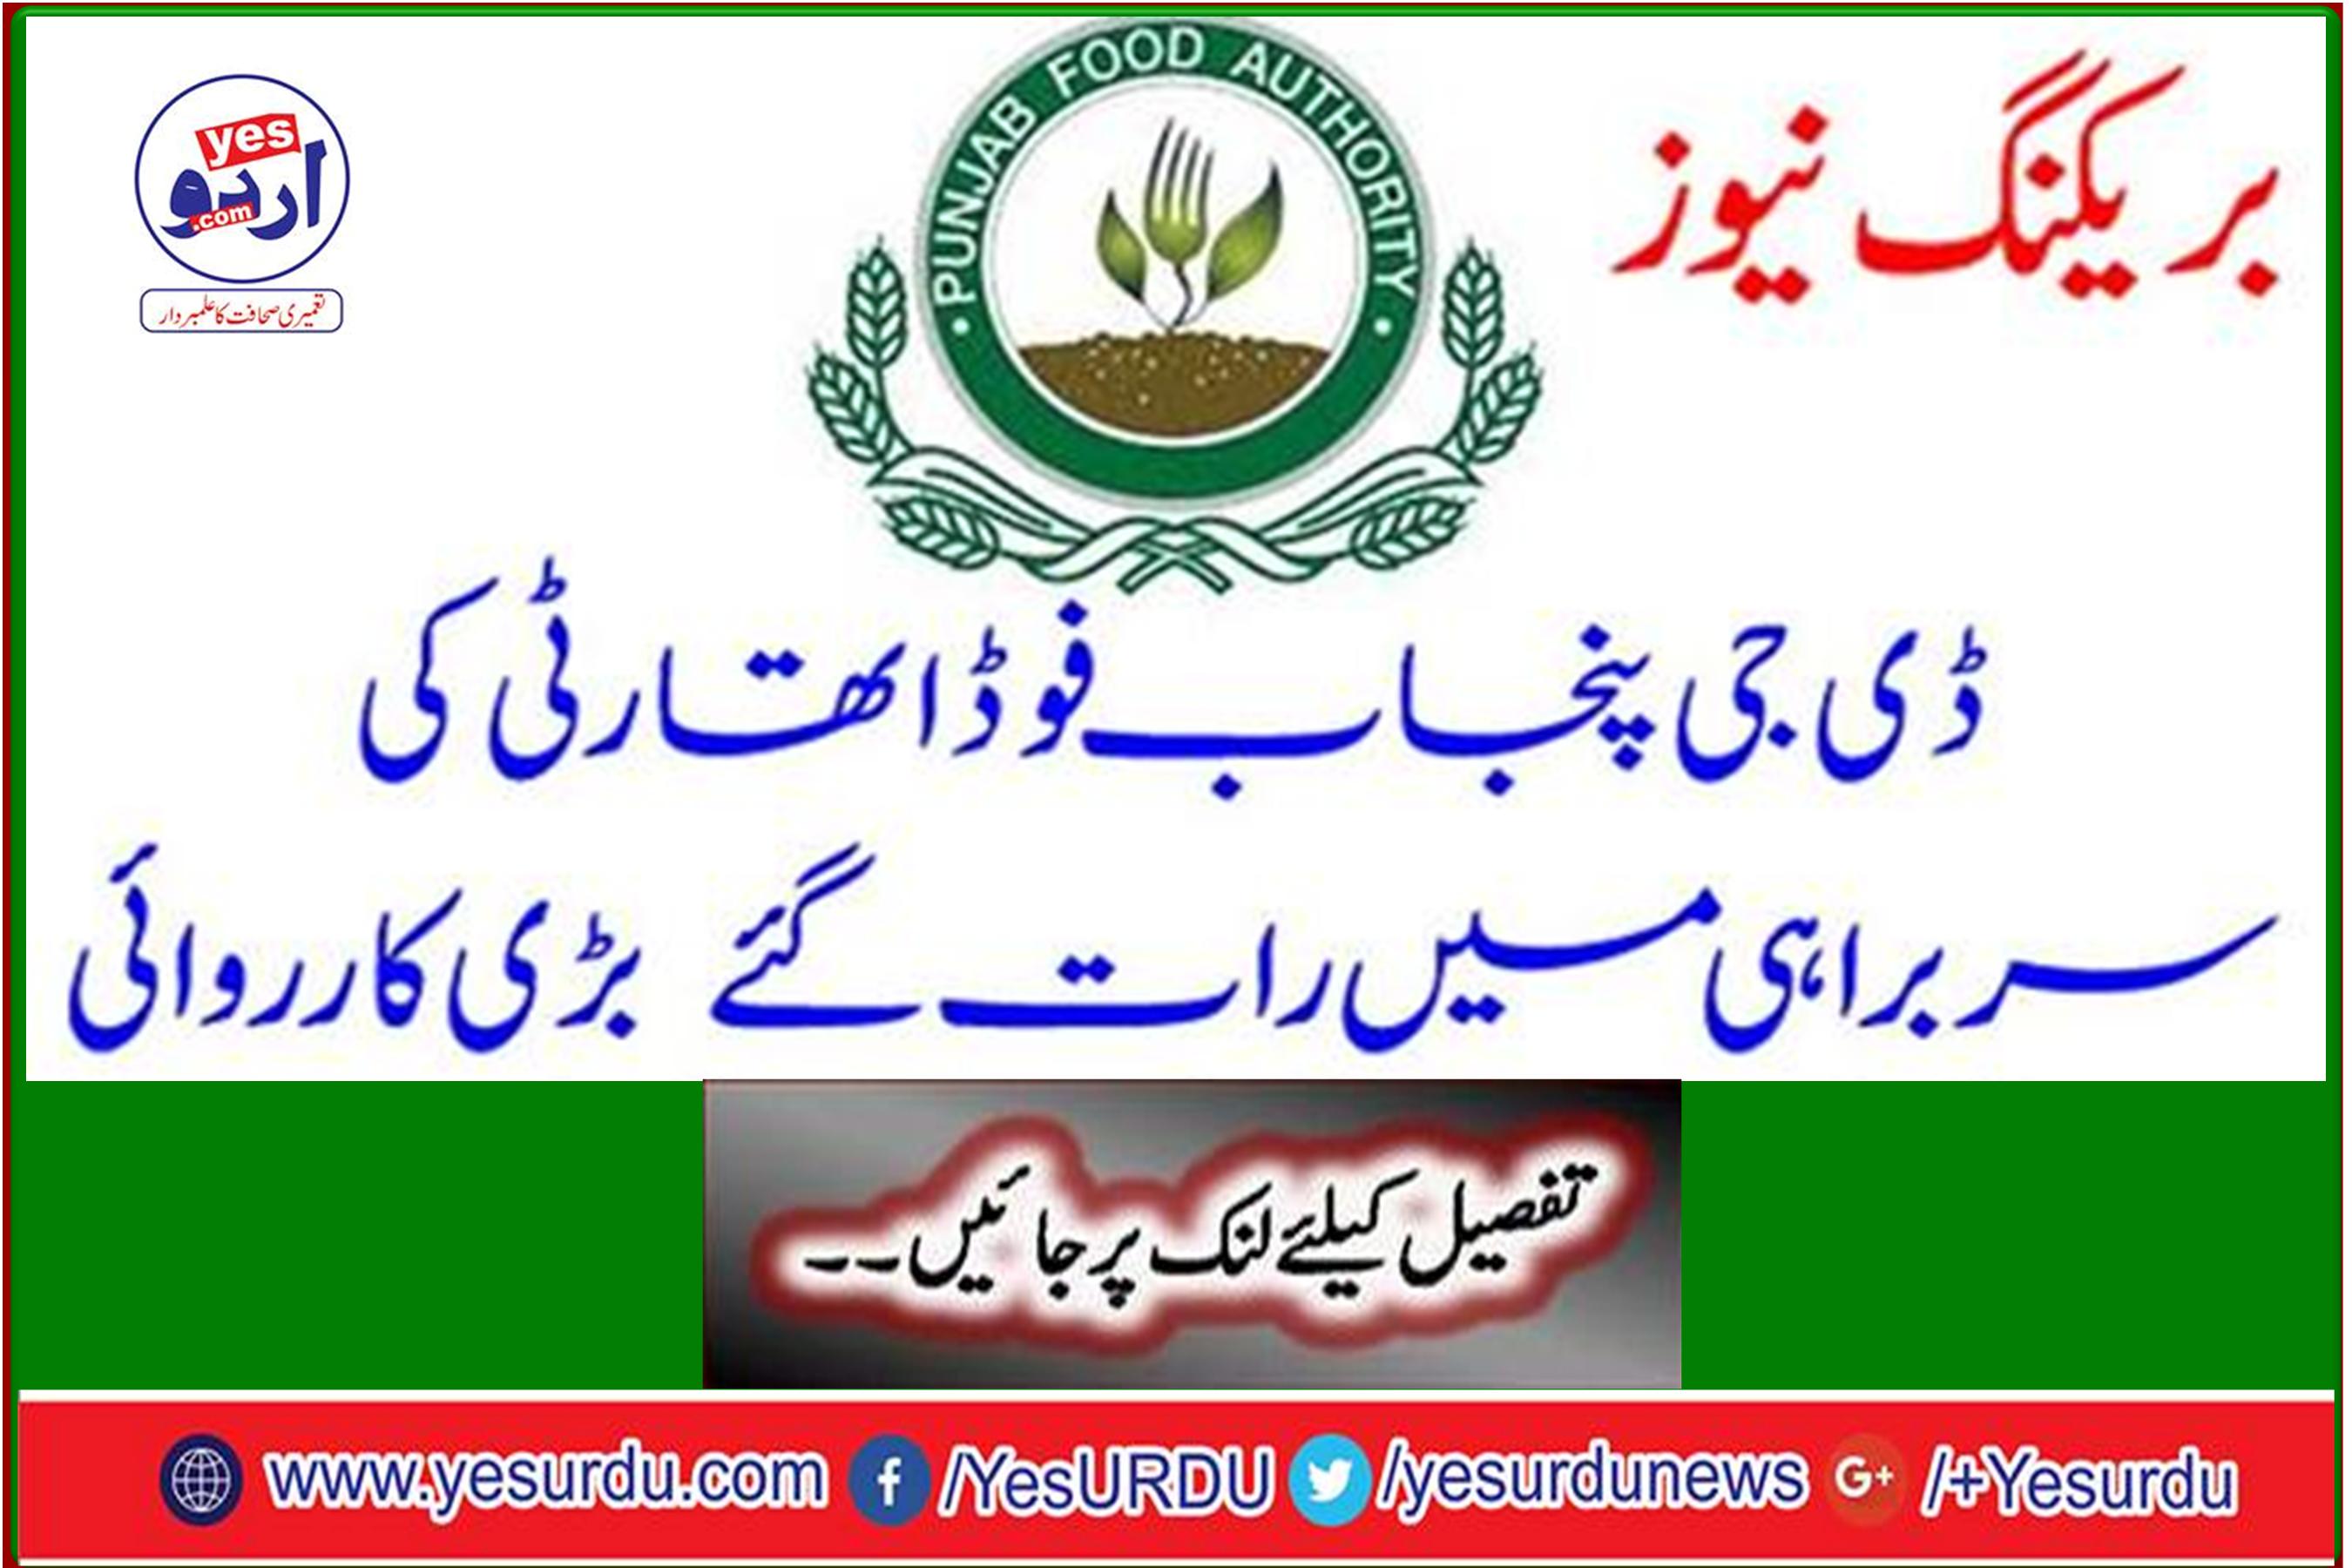 Breaking News: Great action overnight headed by DG Punjab Food Authority